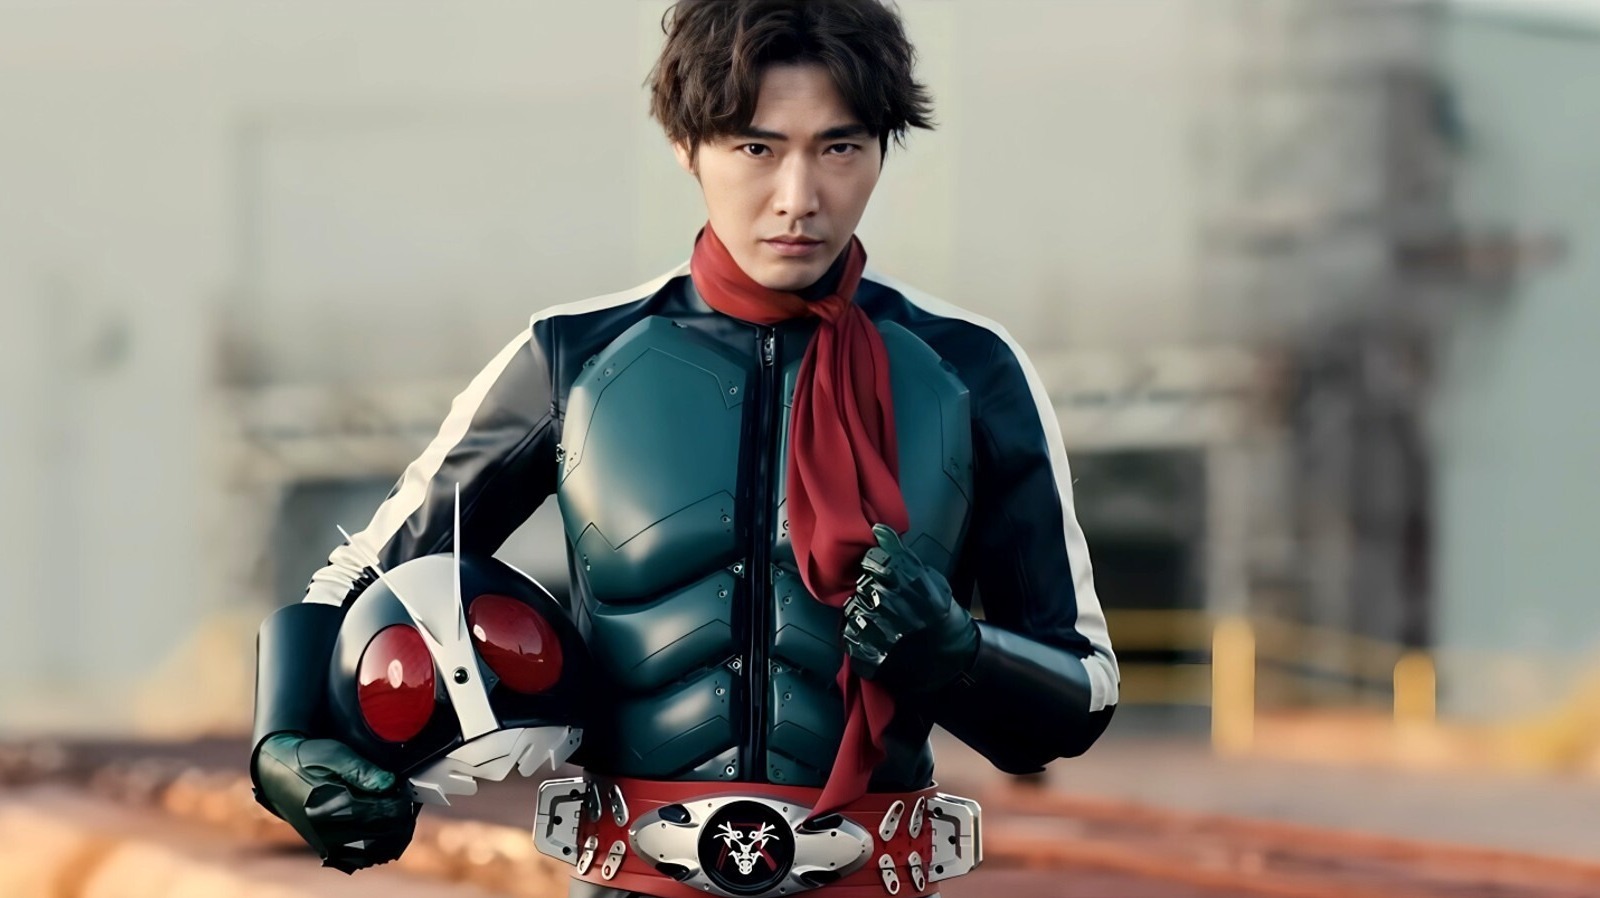 Tasuku Emoto in his Shin Kamen Rider outfit, holding his helmet and with a clenched fist.